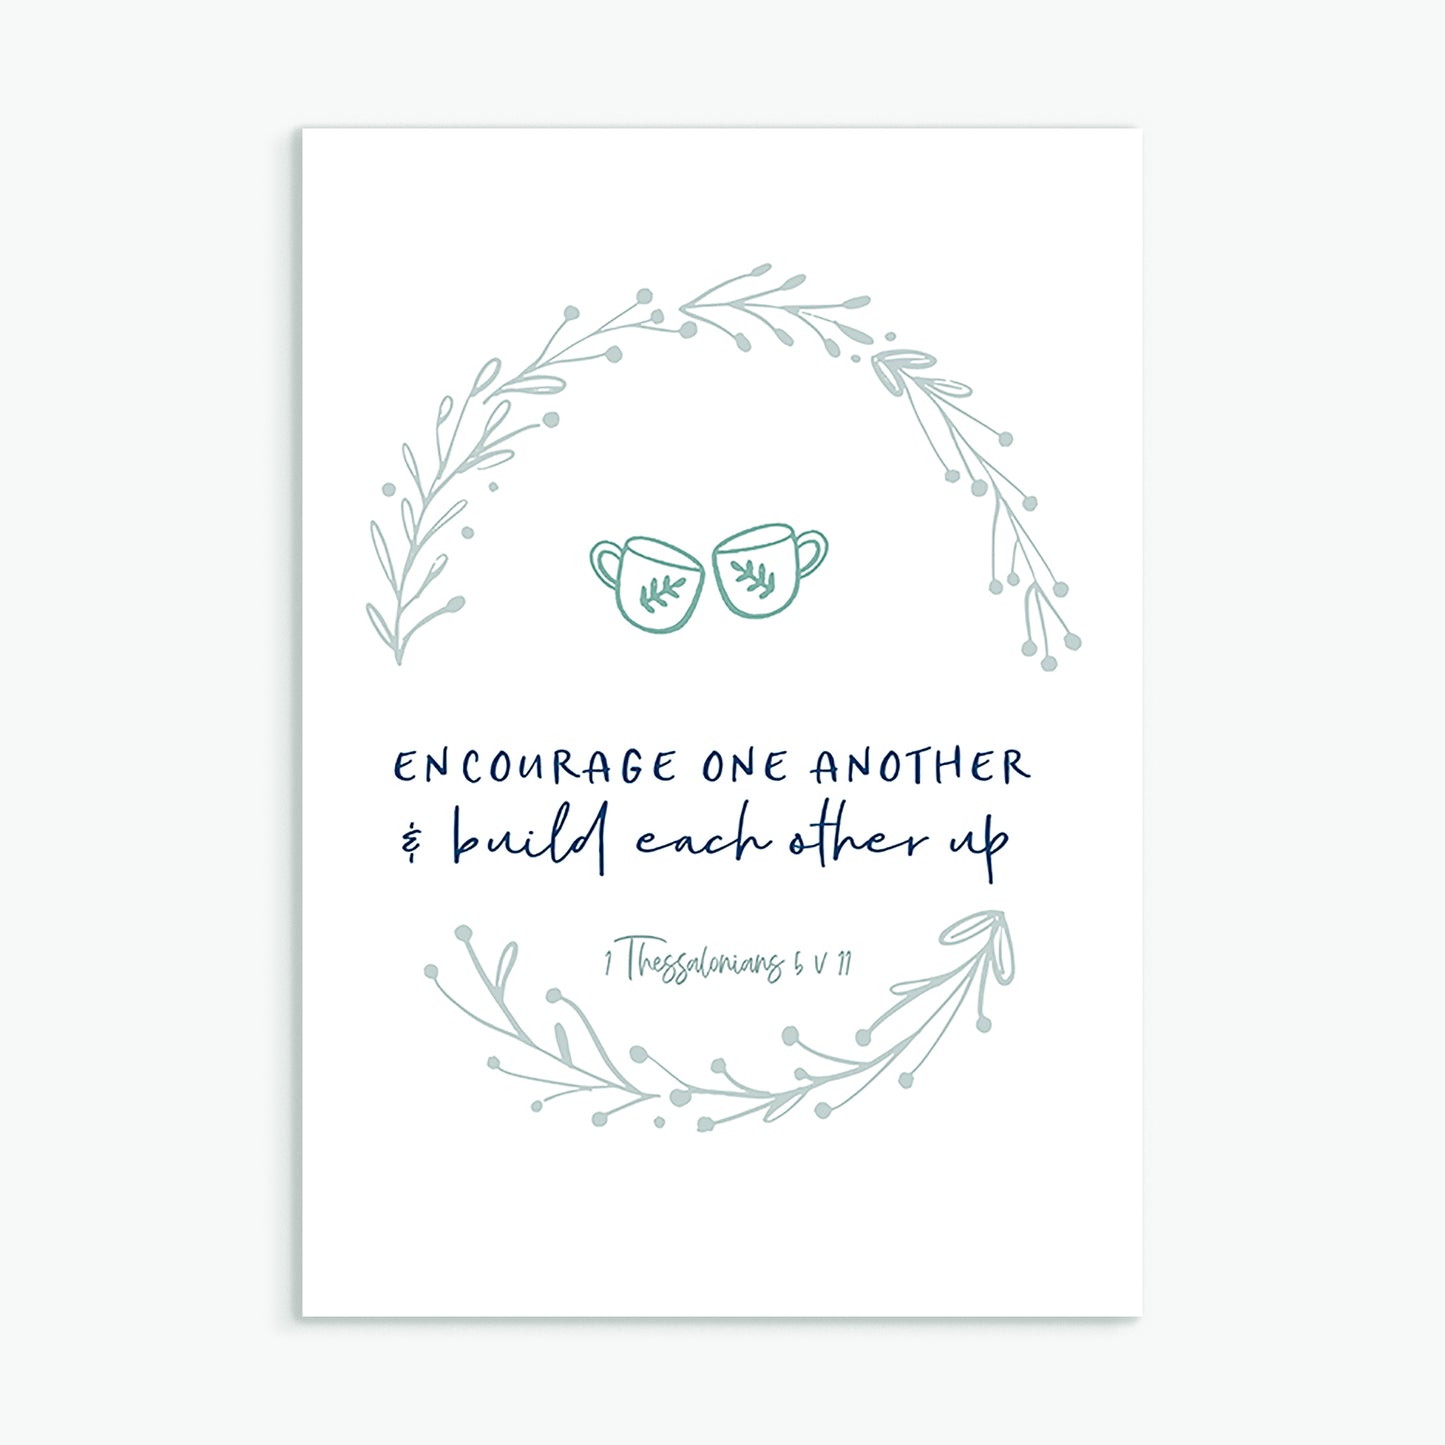 Encourage one another greeting card